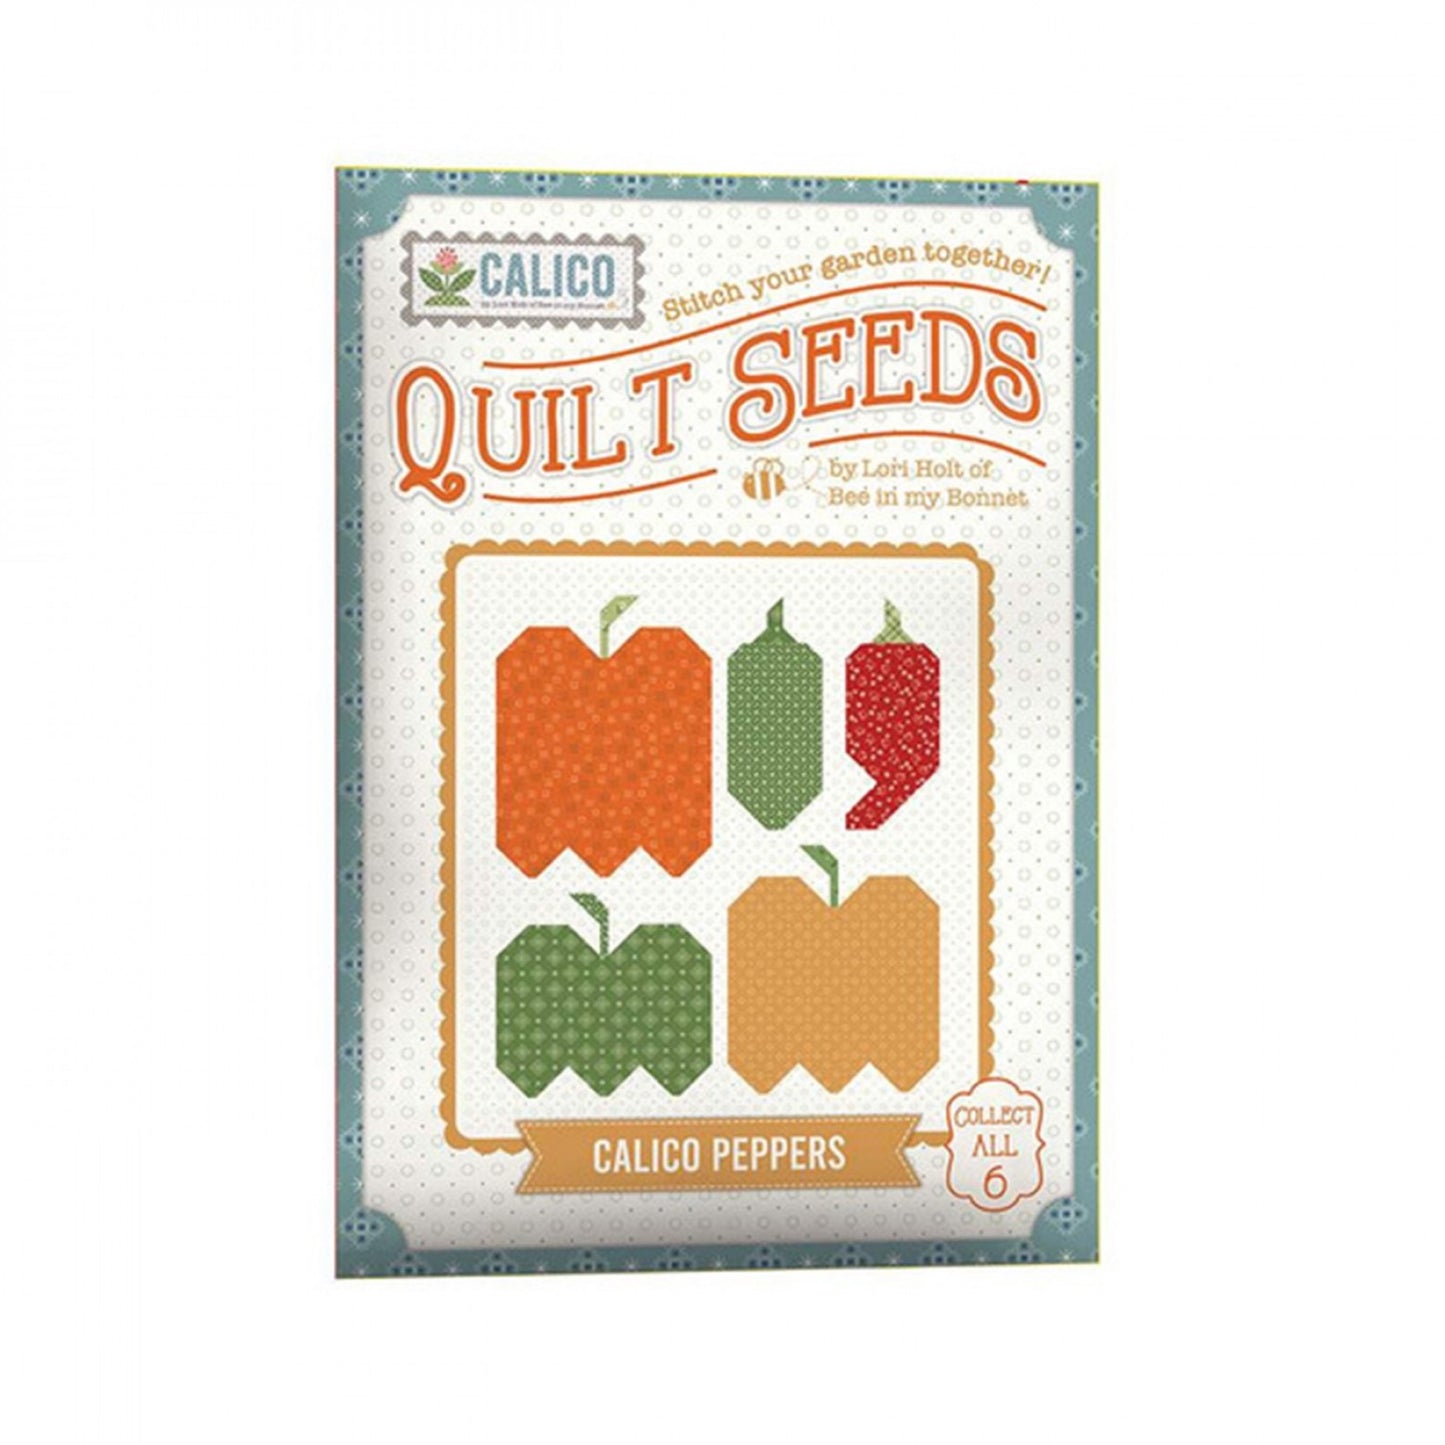 Quilt Seeds- Calico Peppers Quilt Block Pattern